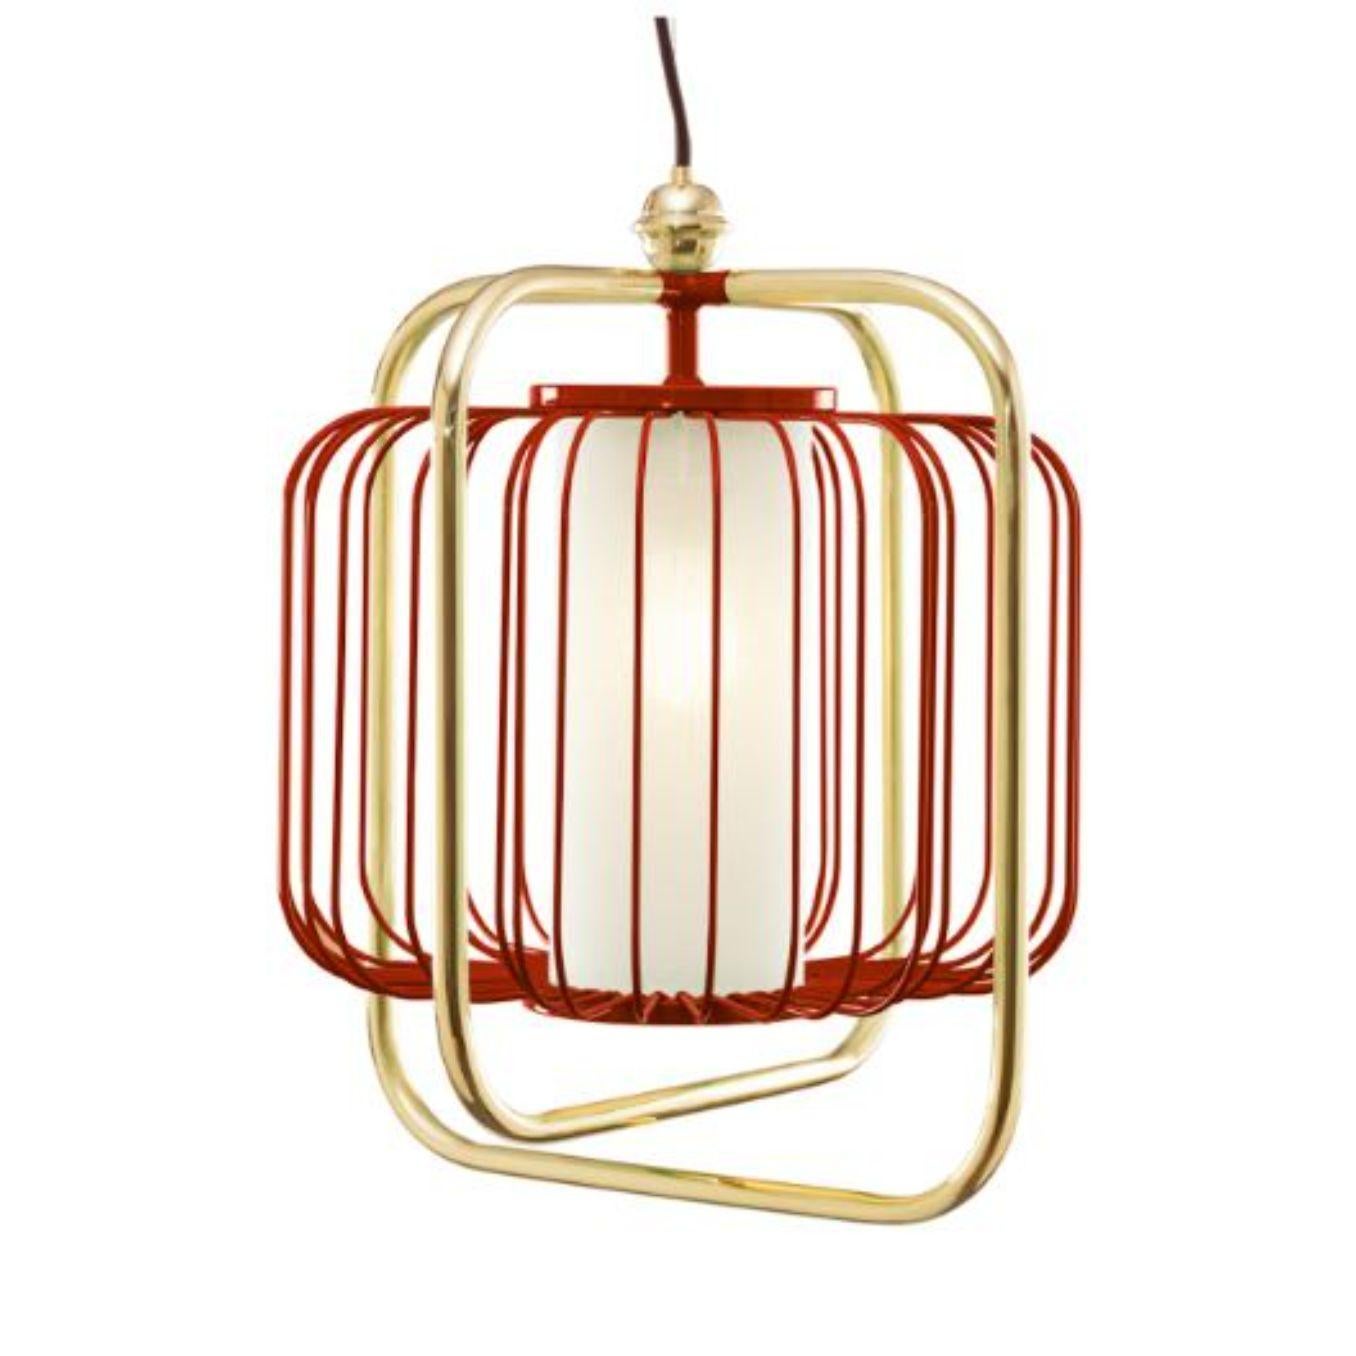 Brass and Dream Jules III Suspension Lamp by Dooq For Sale 2